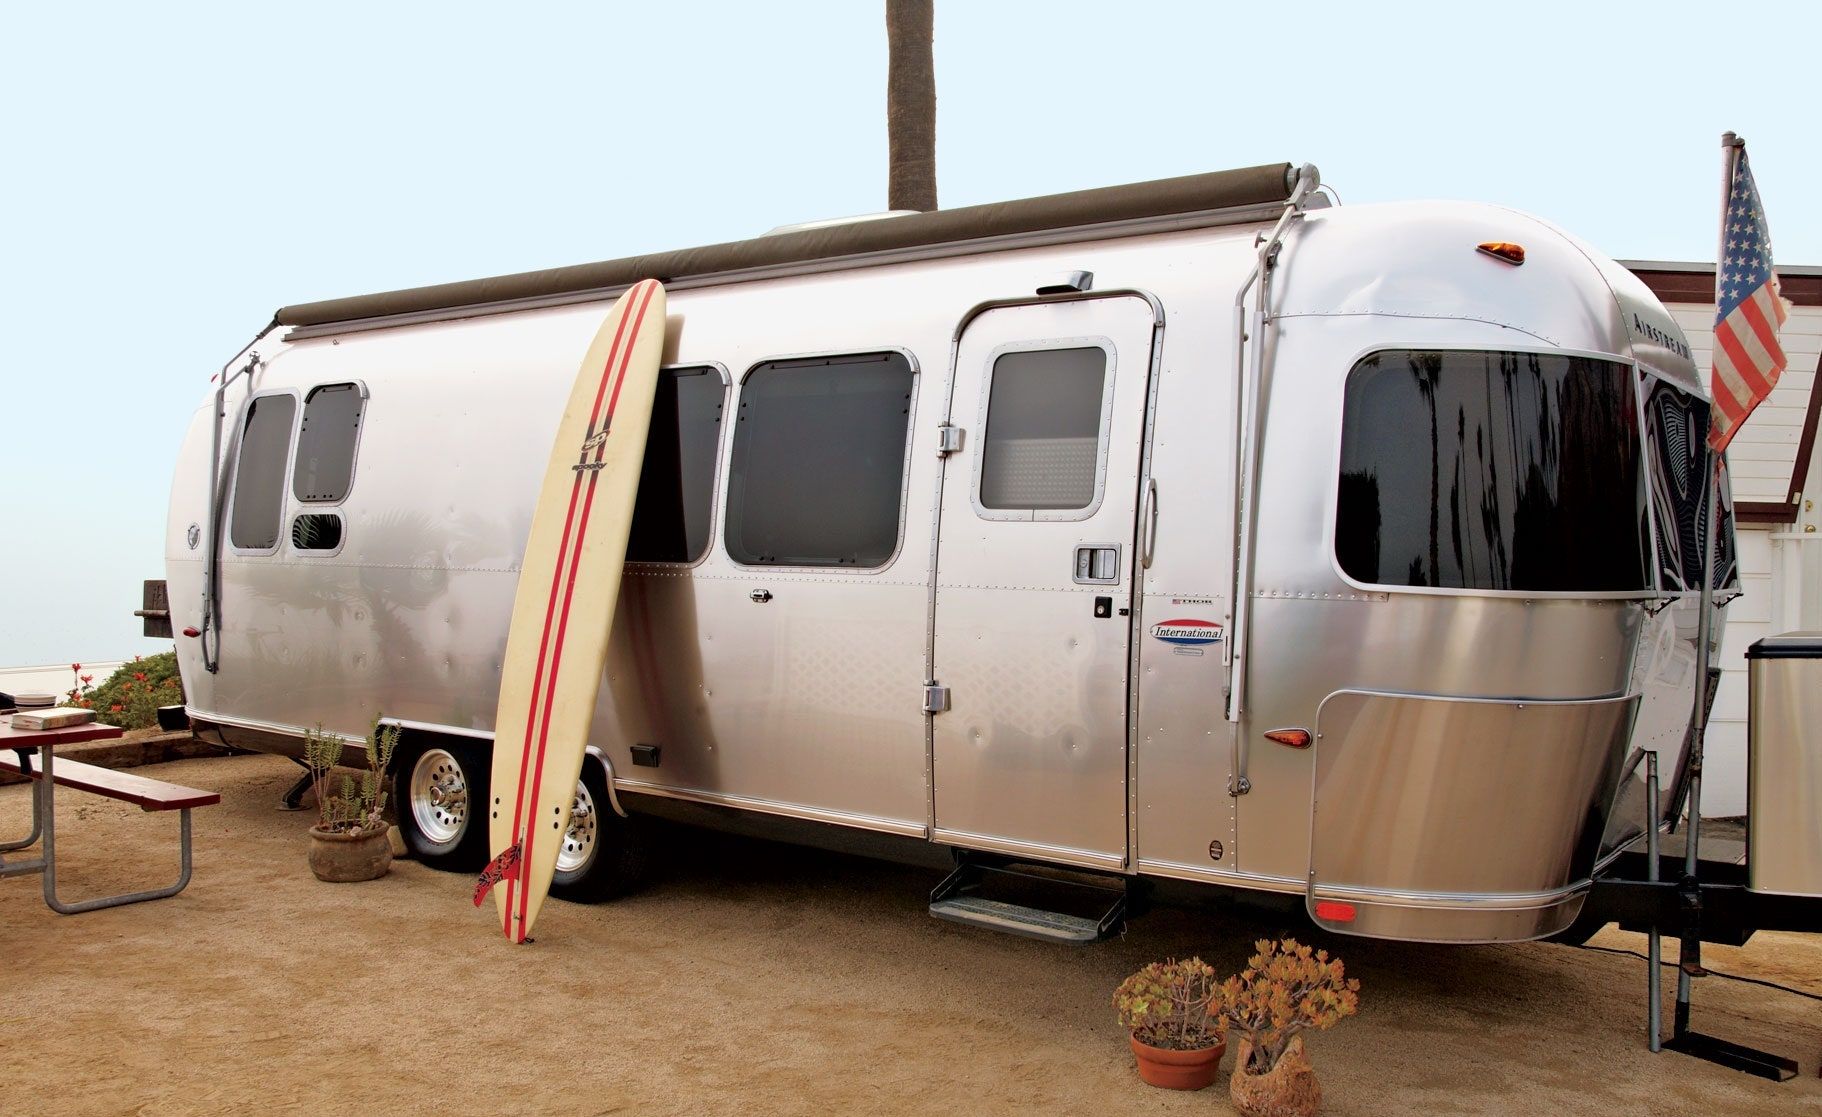 airstream trailer with a surfing board leaning against it